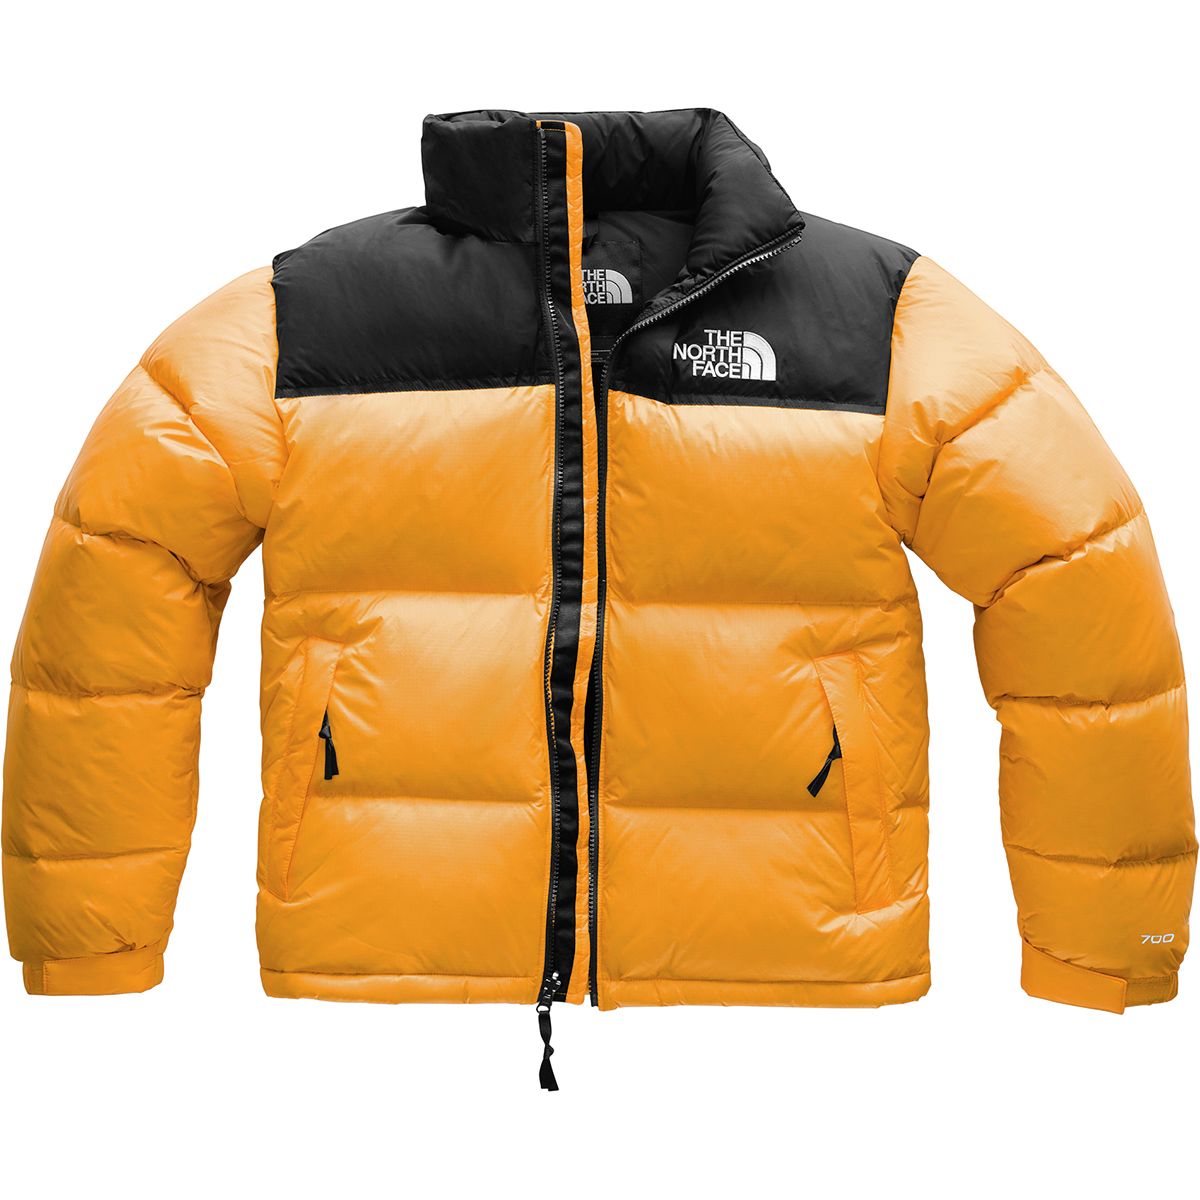 The North Face - Men's Jackets, Coats, Parkas. Sustainable fashion and ...